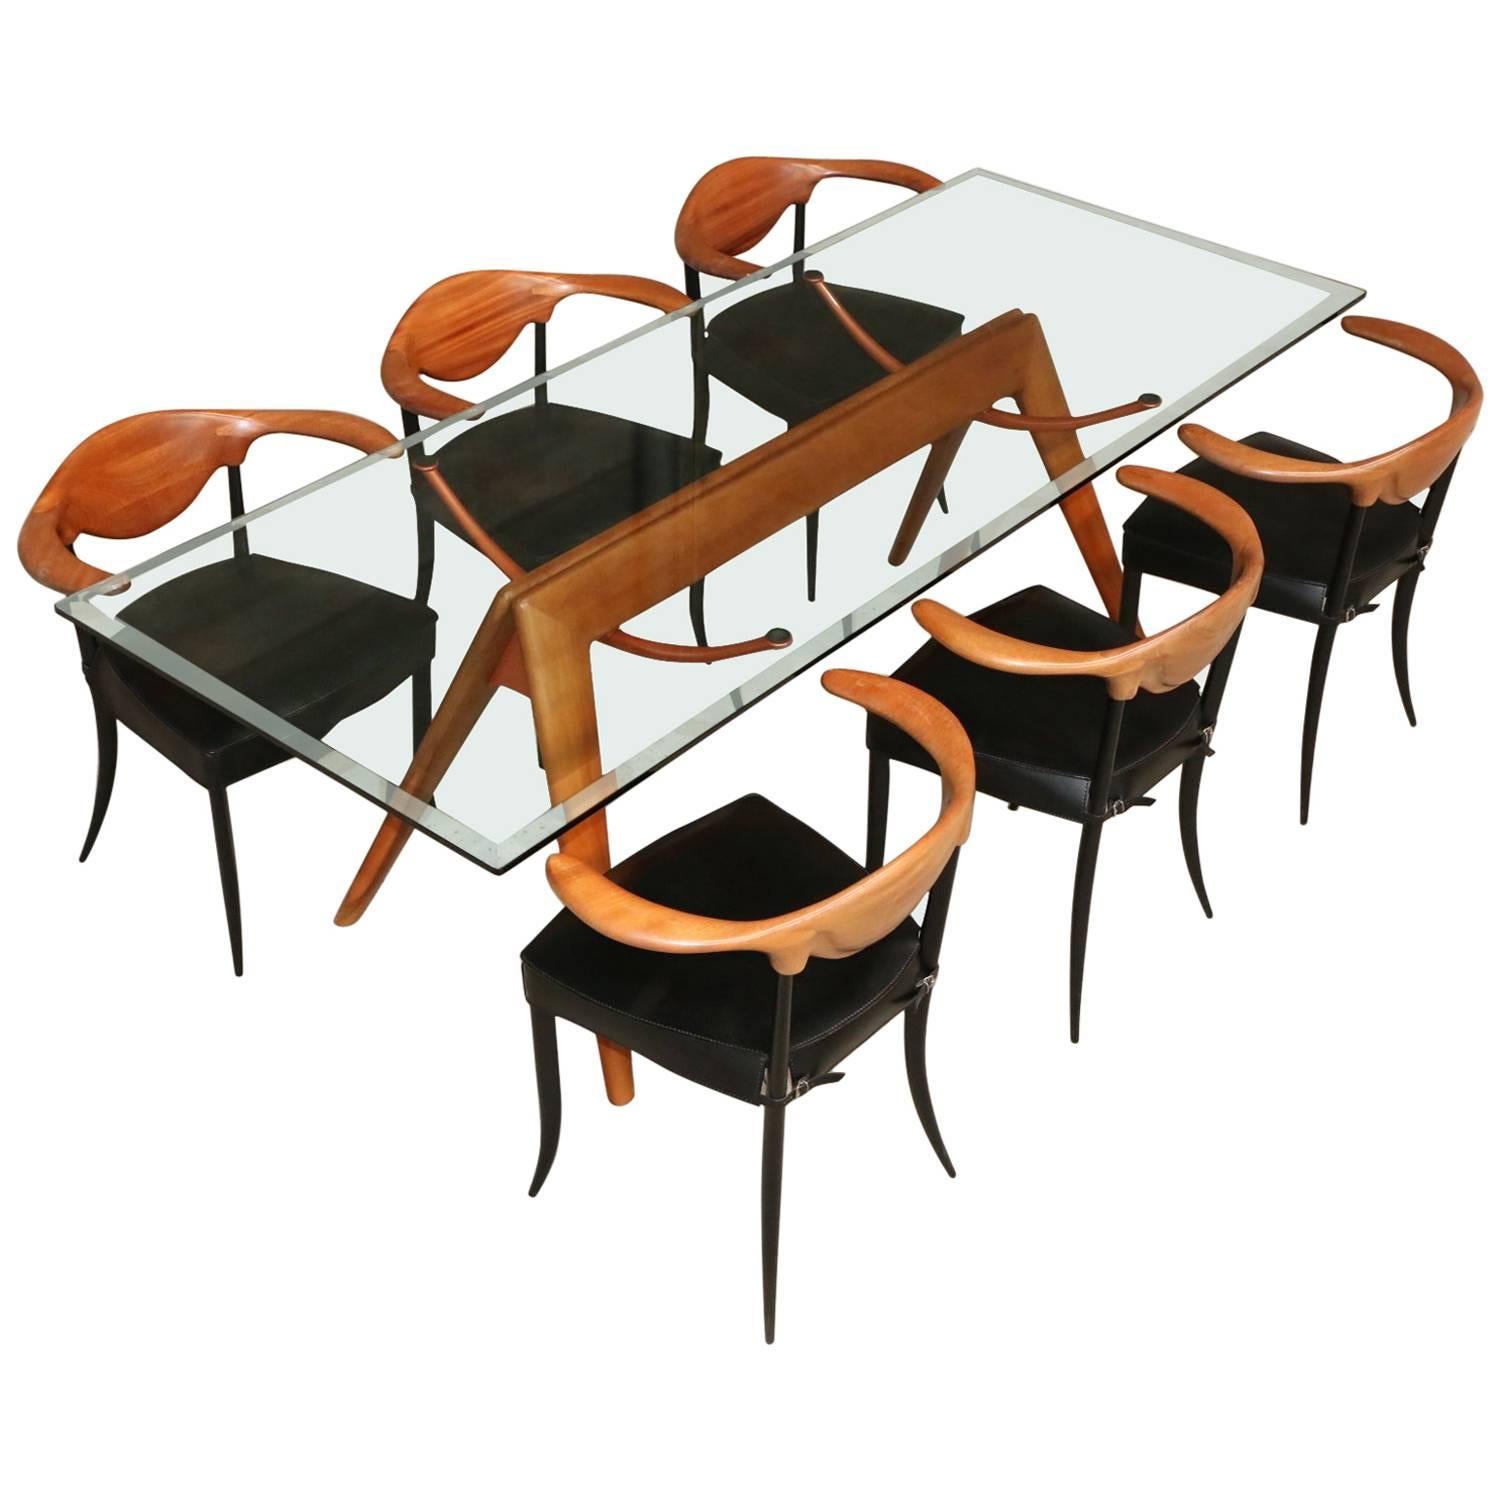 Impressive glass table with wooden base and six cowhorn chairs, Italy